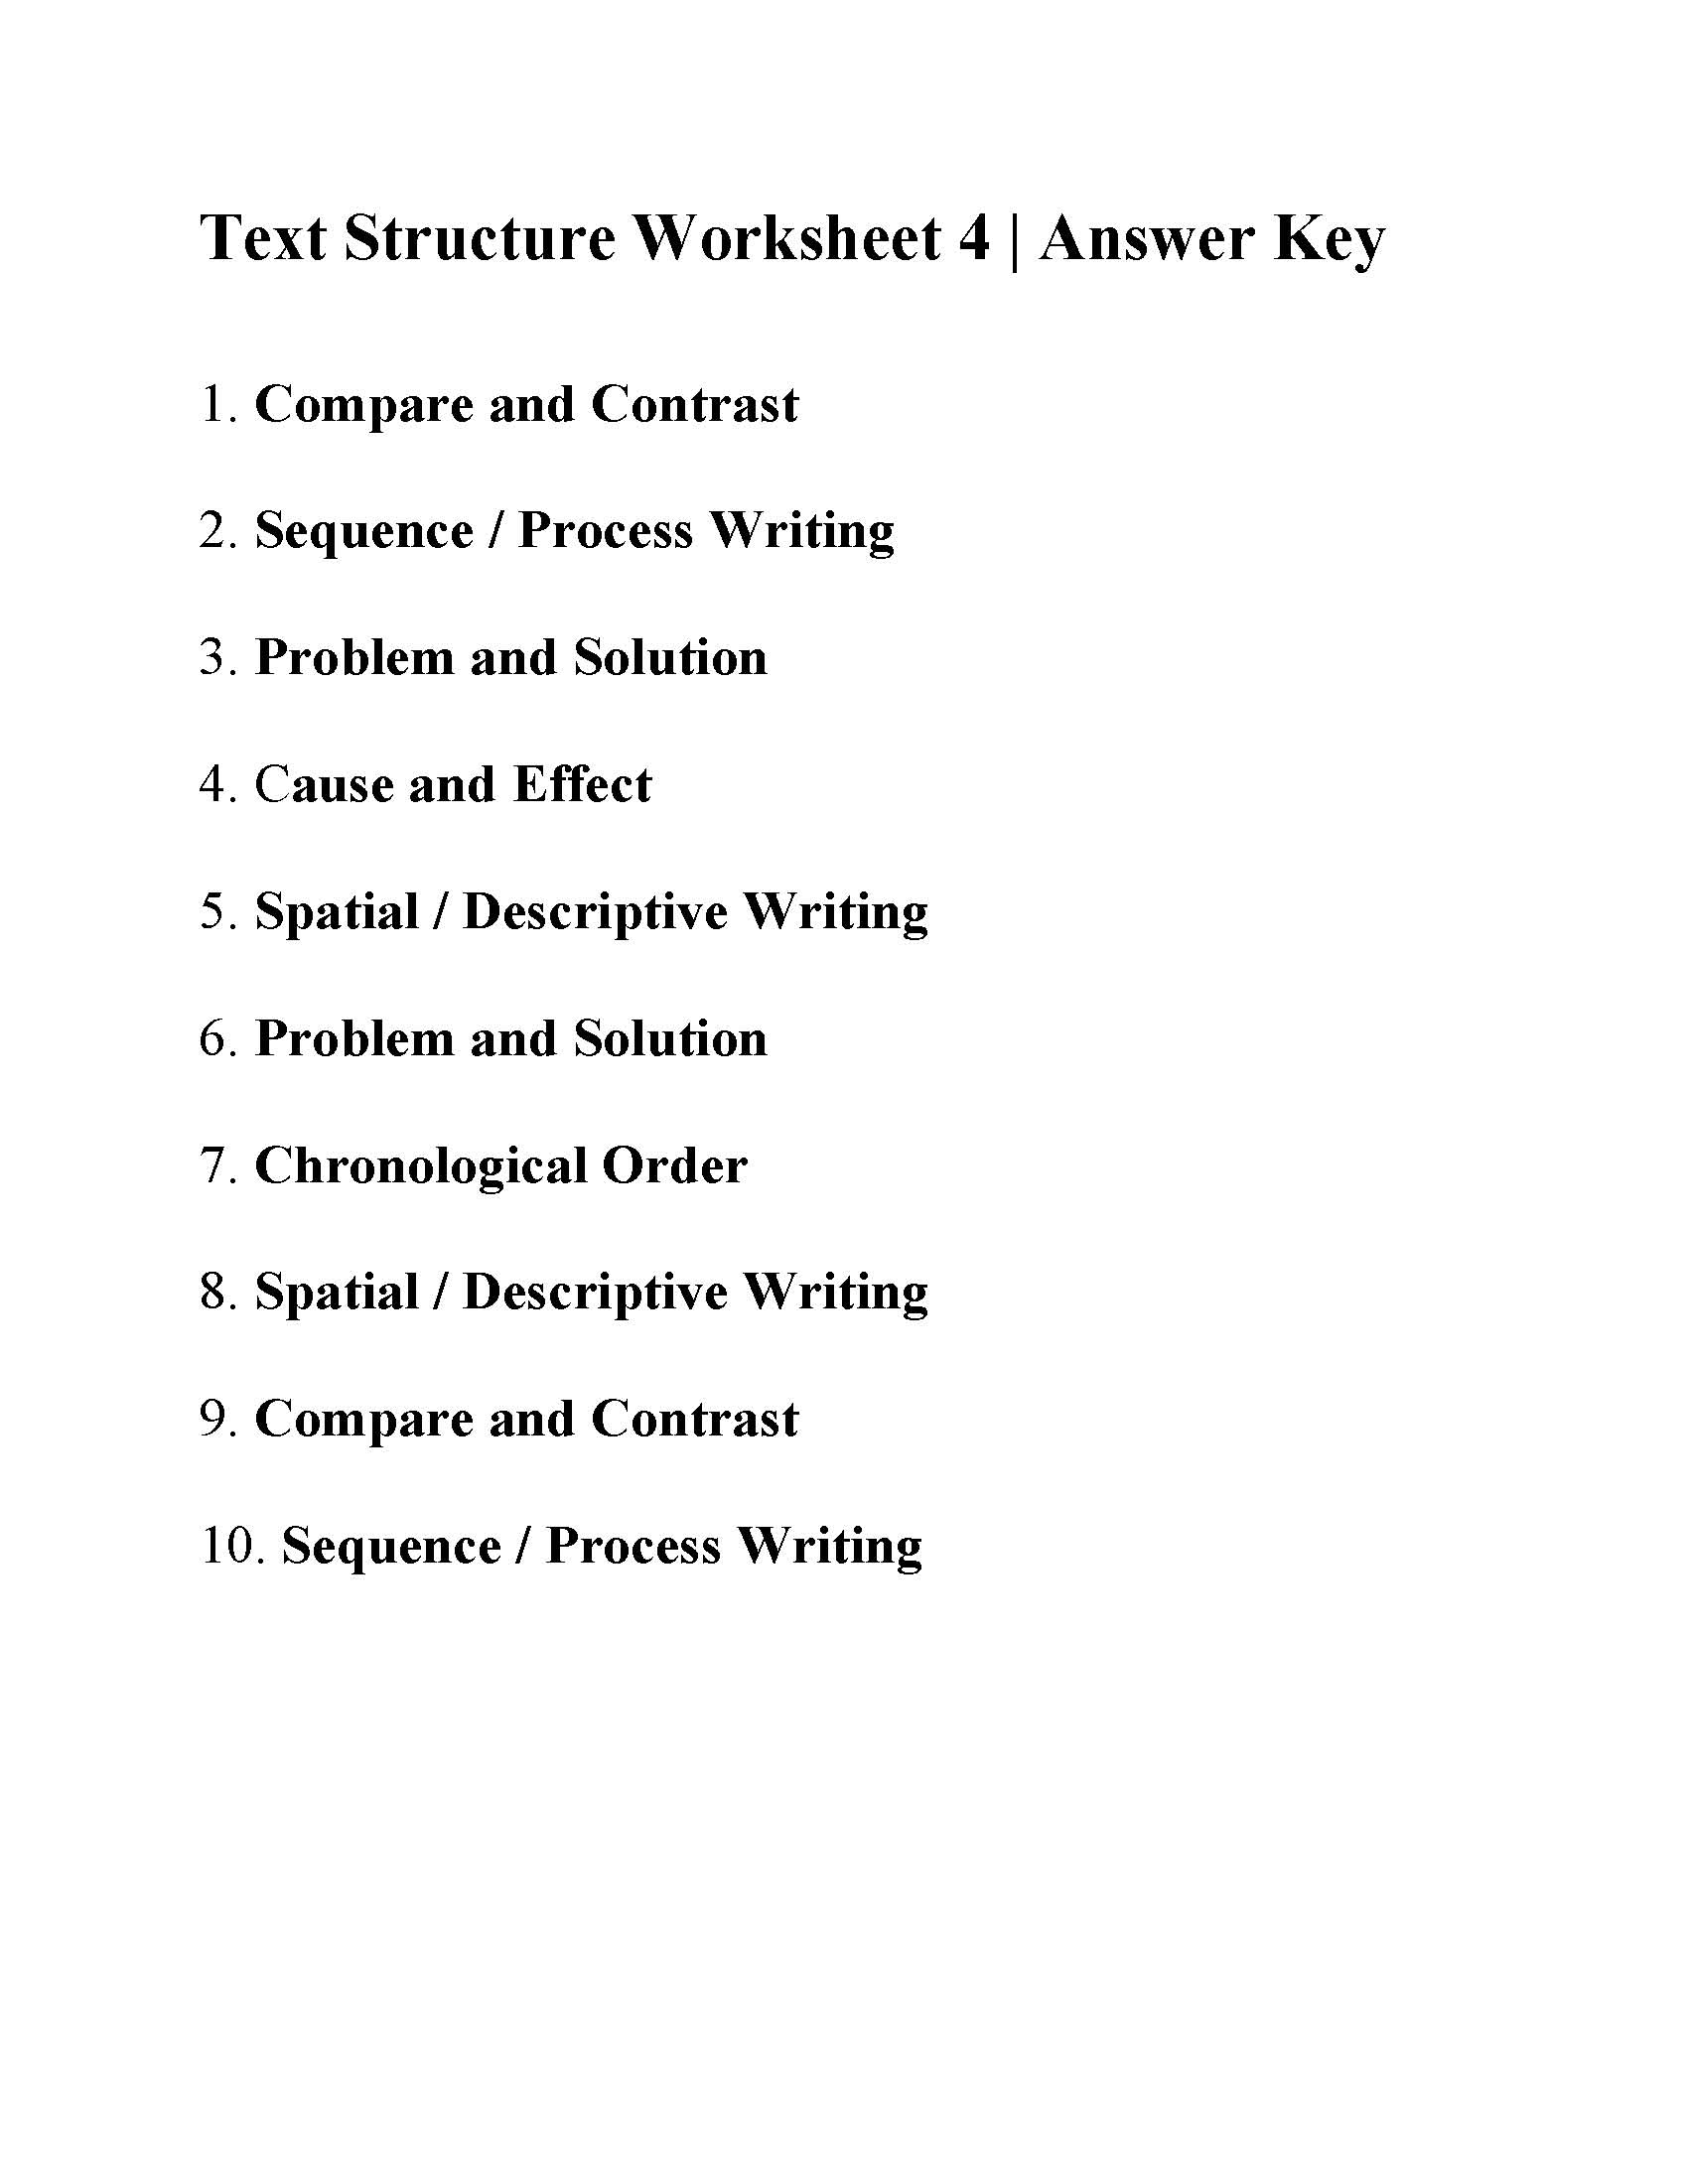 Text Structure Worksheet 4 Answers